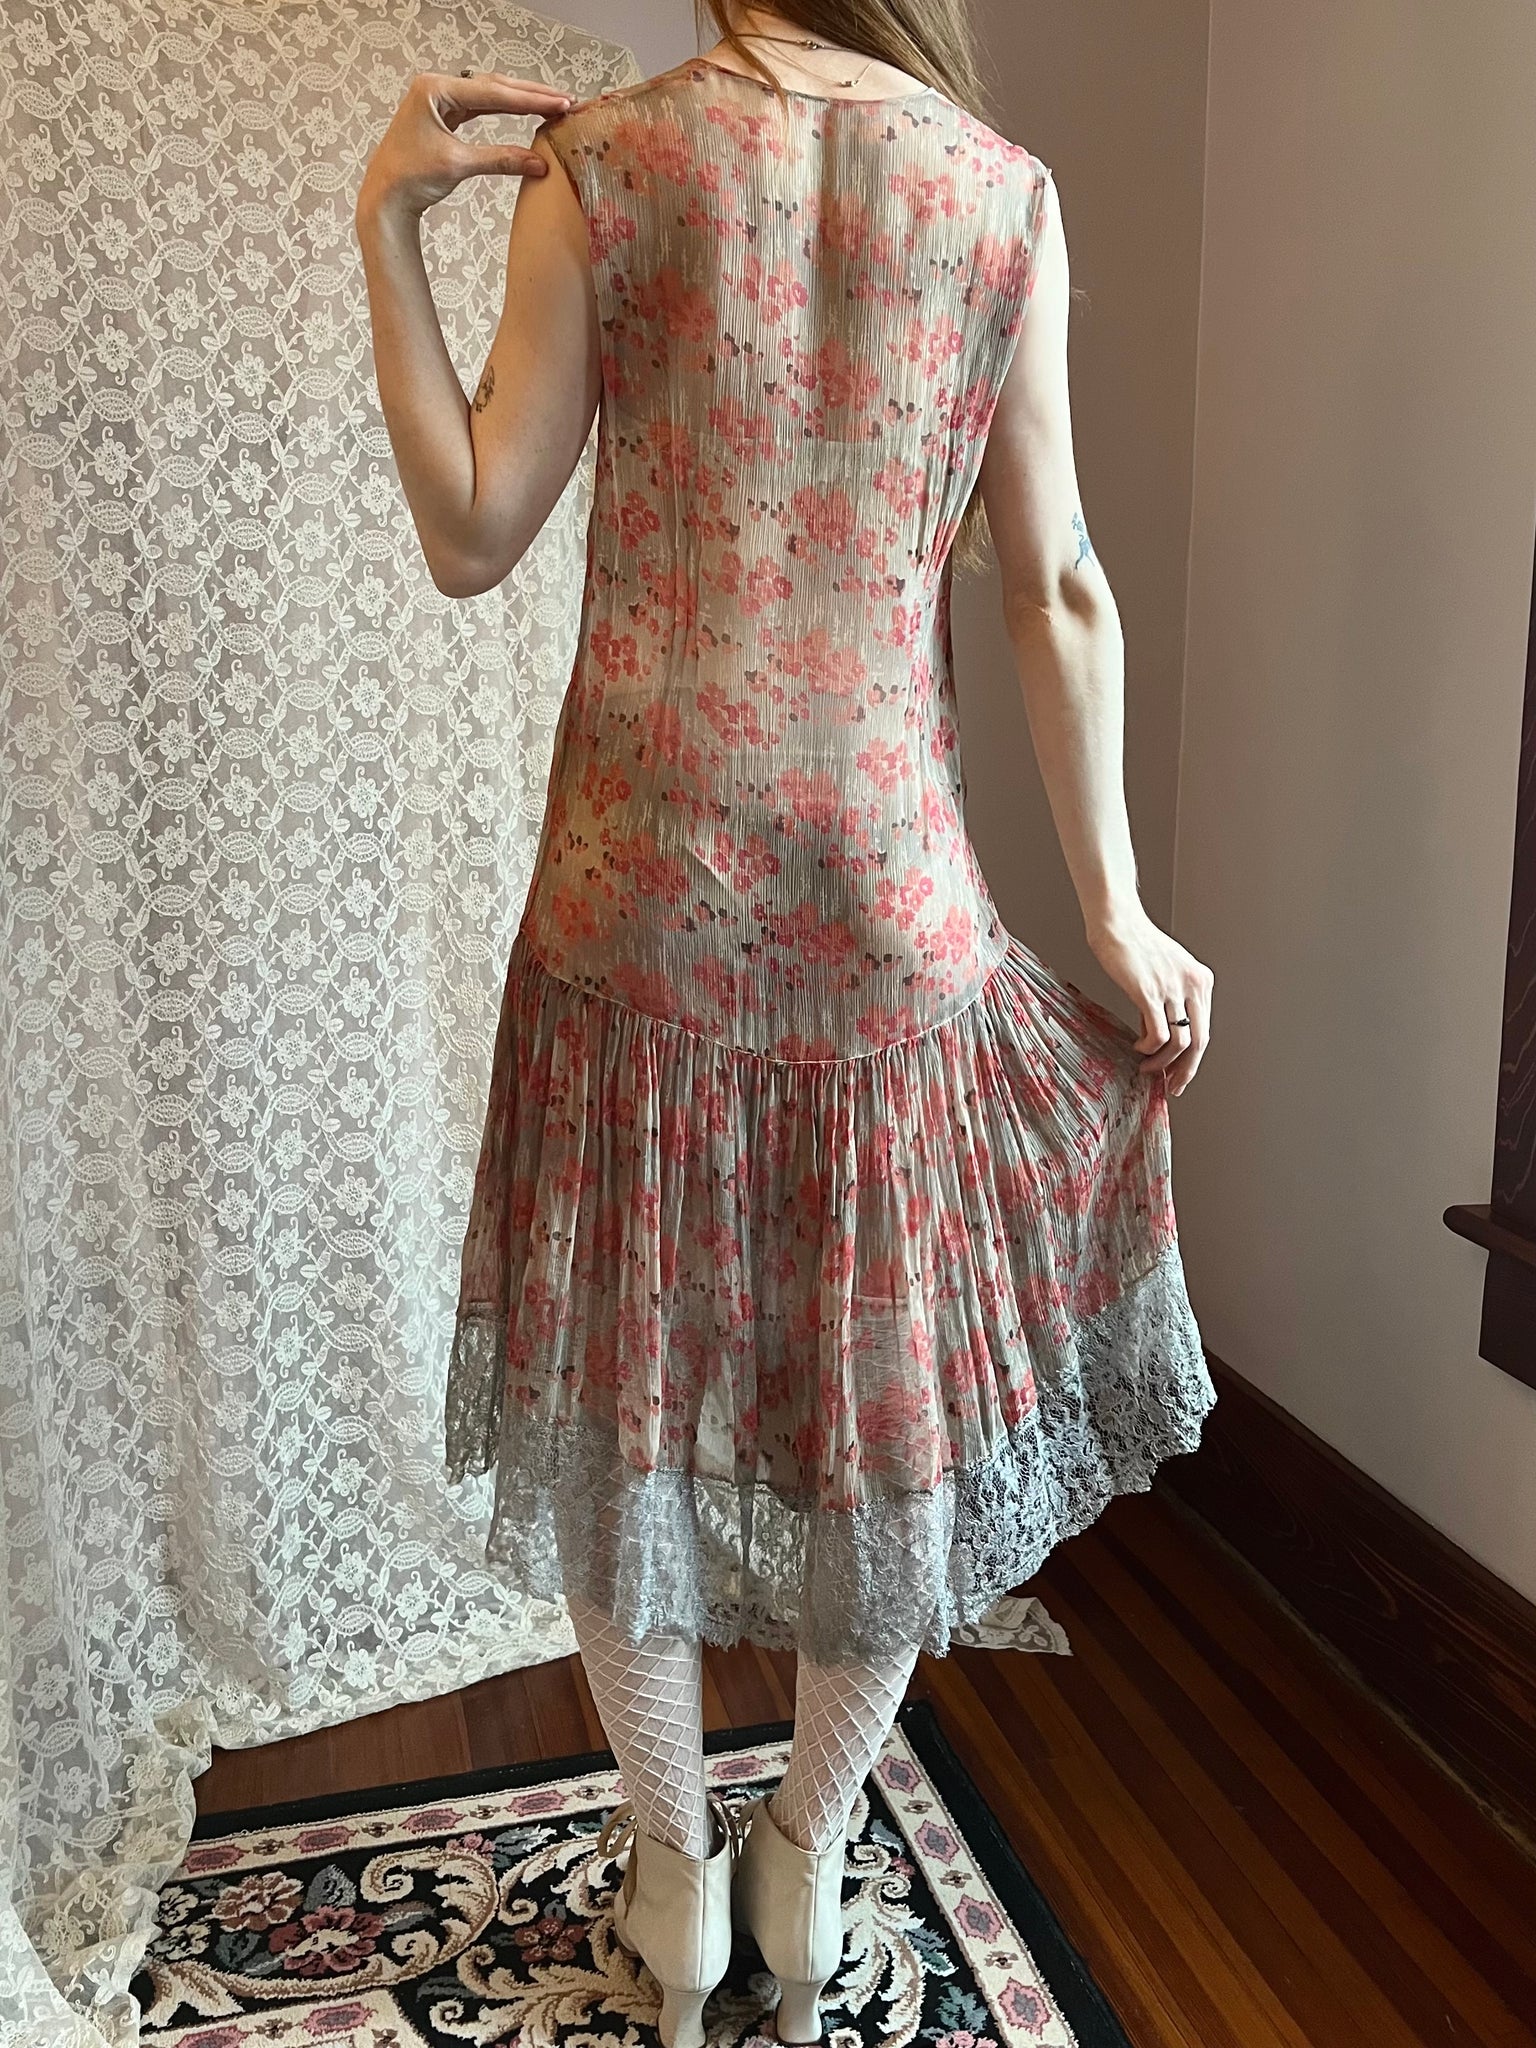 1920s Silk Chiffon Floral Lace Dress Coral Bow